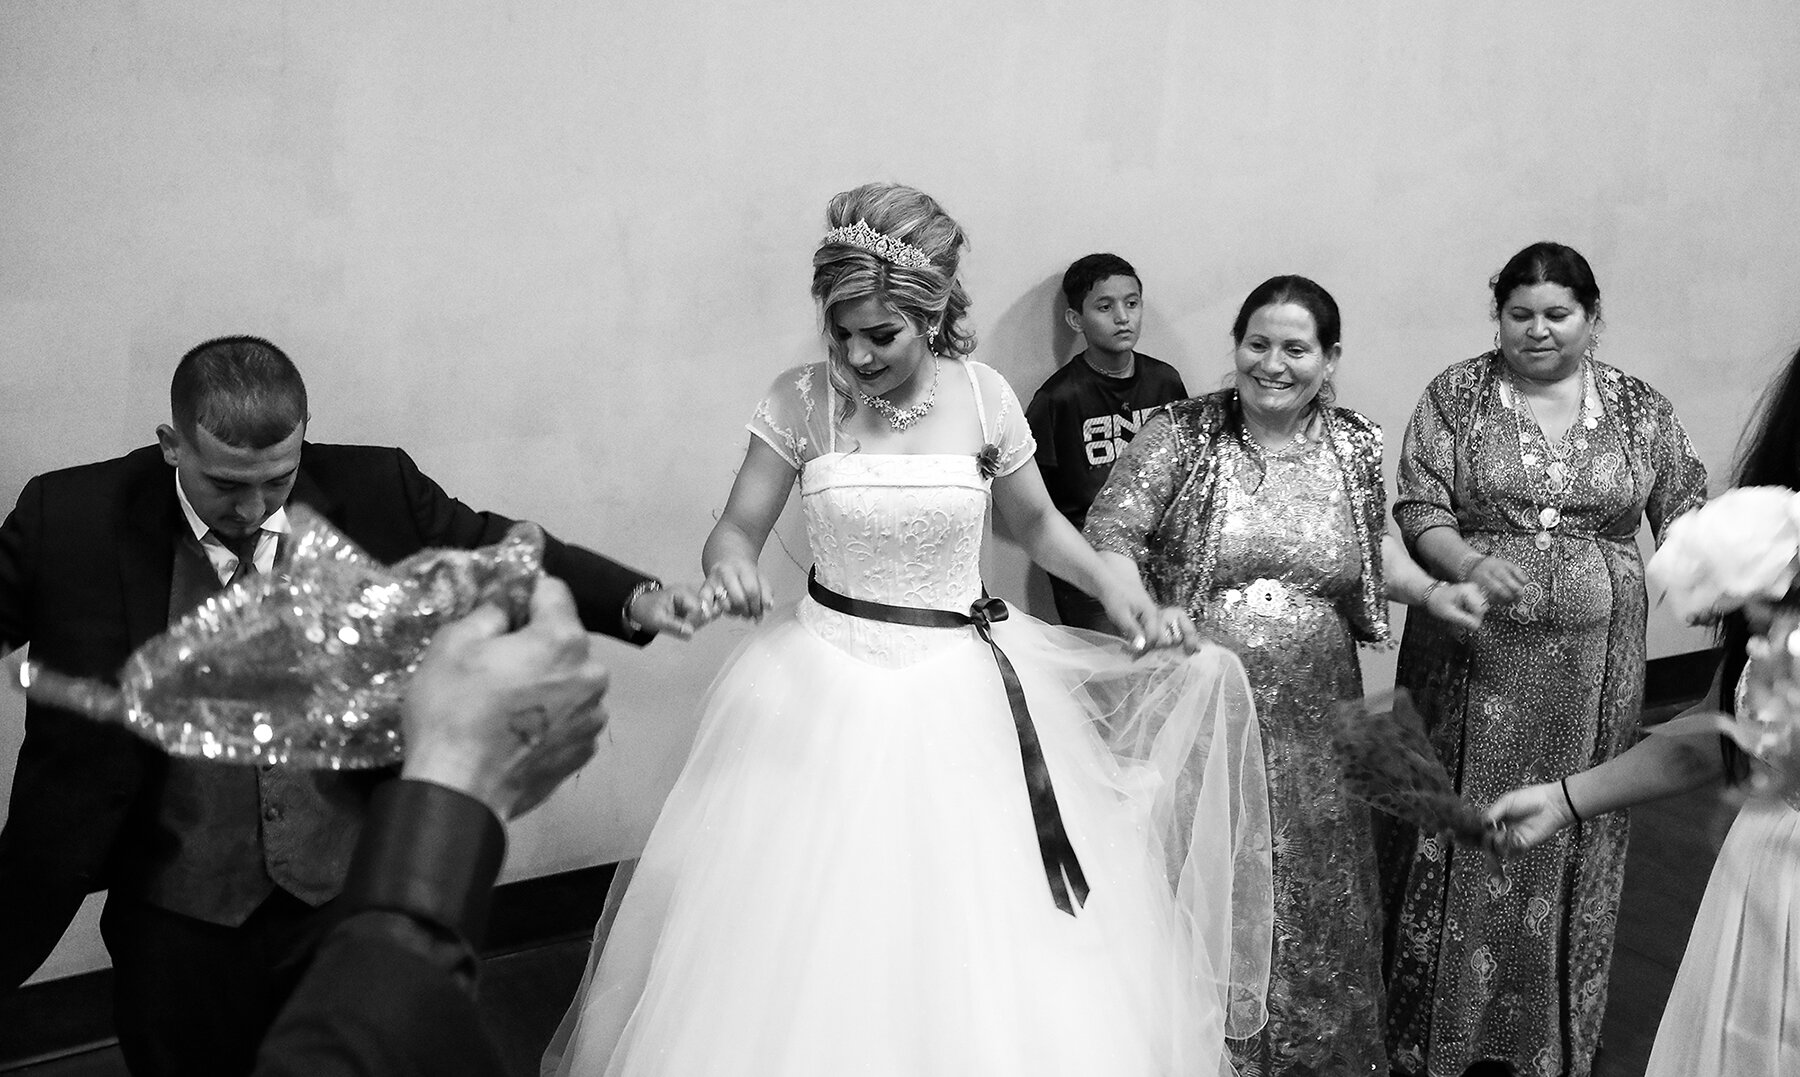  Women wear traditional dresses and everyone joins in a shoulder-shaking shingaly dance on a Yazidi couple’s wedding day. Lincoln, Nebraska, 2017. 